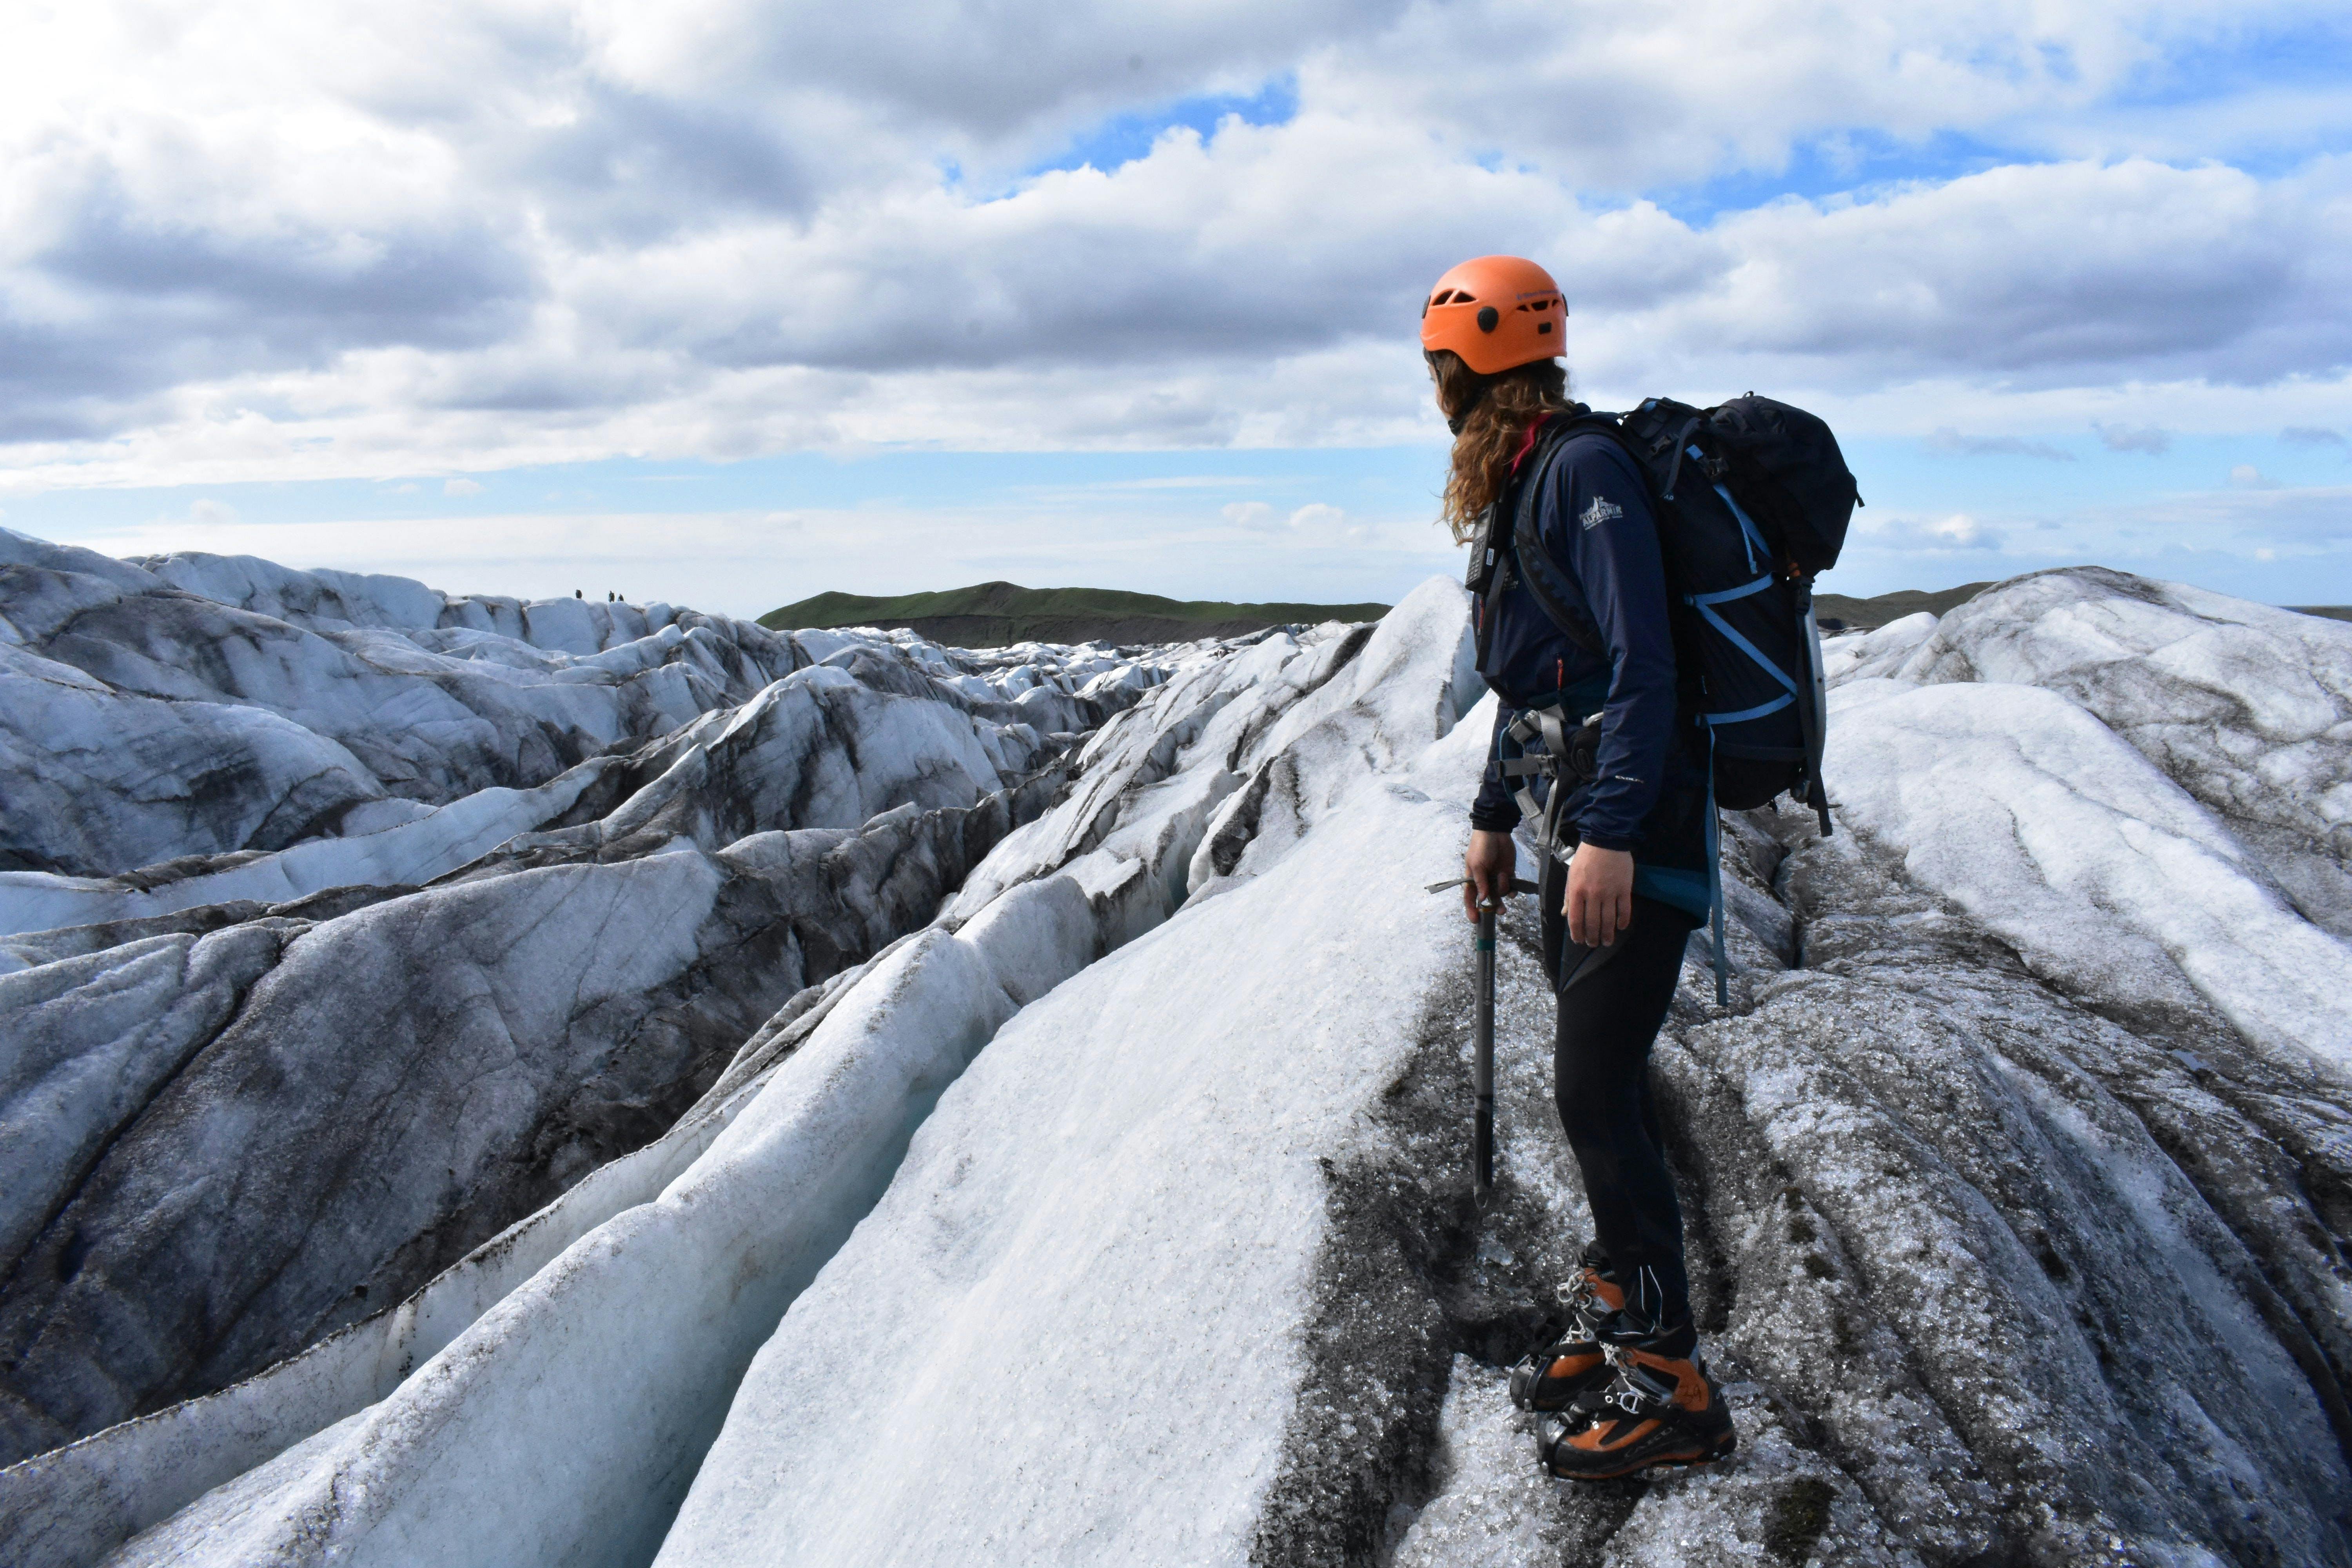 Standing on top of an Icelandic glacier, you will, quite literally, feel 'on top of the world!'